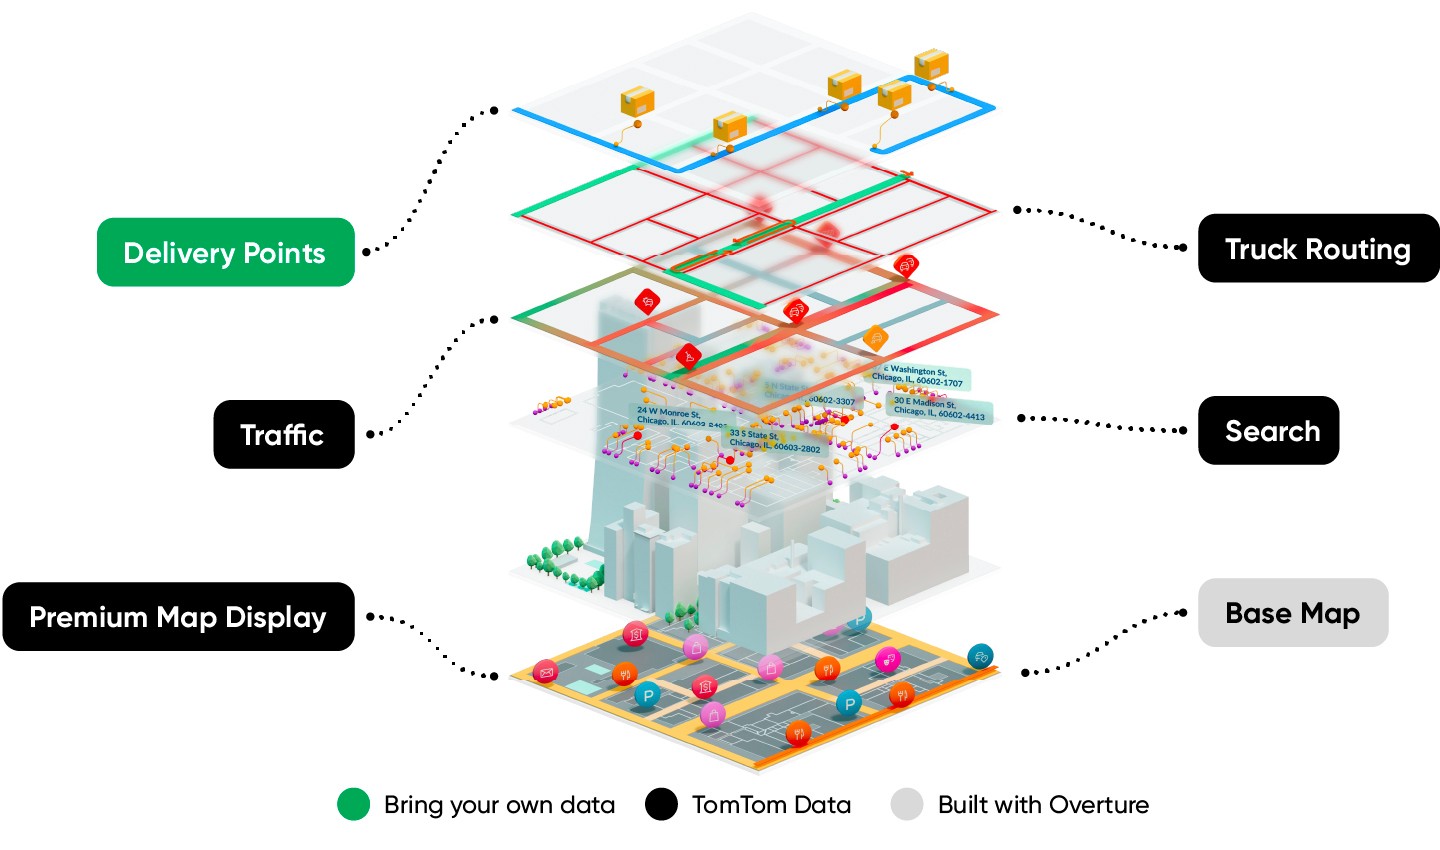 TomTom’s new Maps Platform builds map and location tech from many layers. These include a base map, private data, visualization, routing, traffic and POIs. (Legend: Gray data layer is built with Overture; Black data layers use TomTom data; Green data layers are your own (customer) data.)